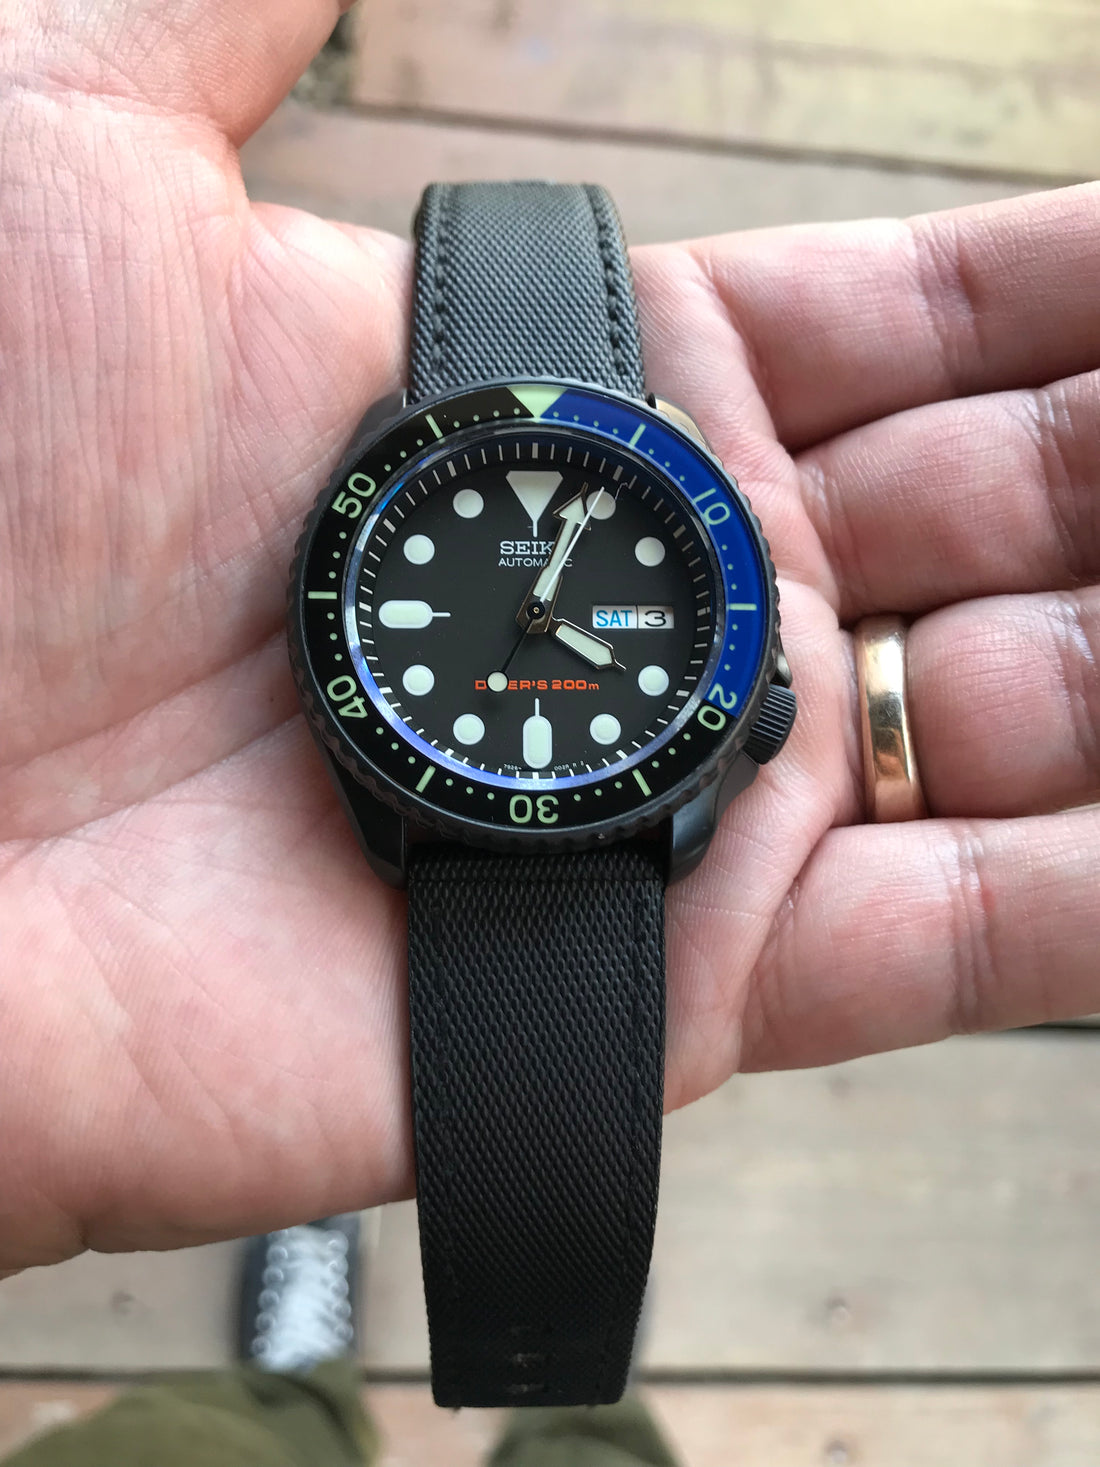 Local Love Shout Out - Modded SKX